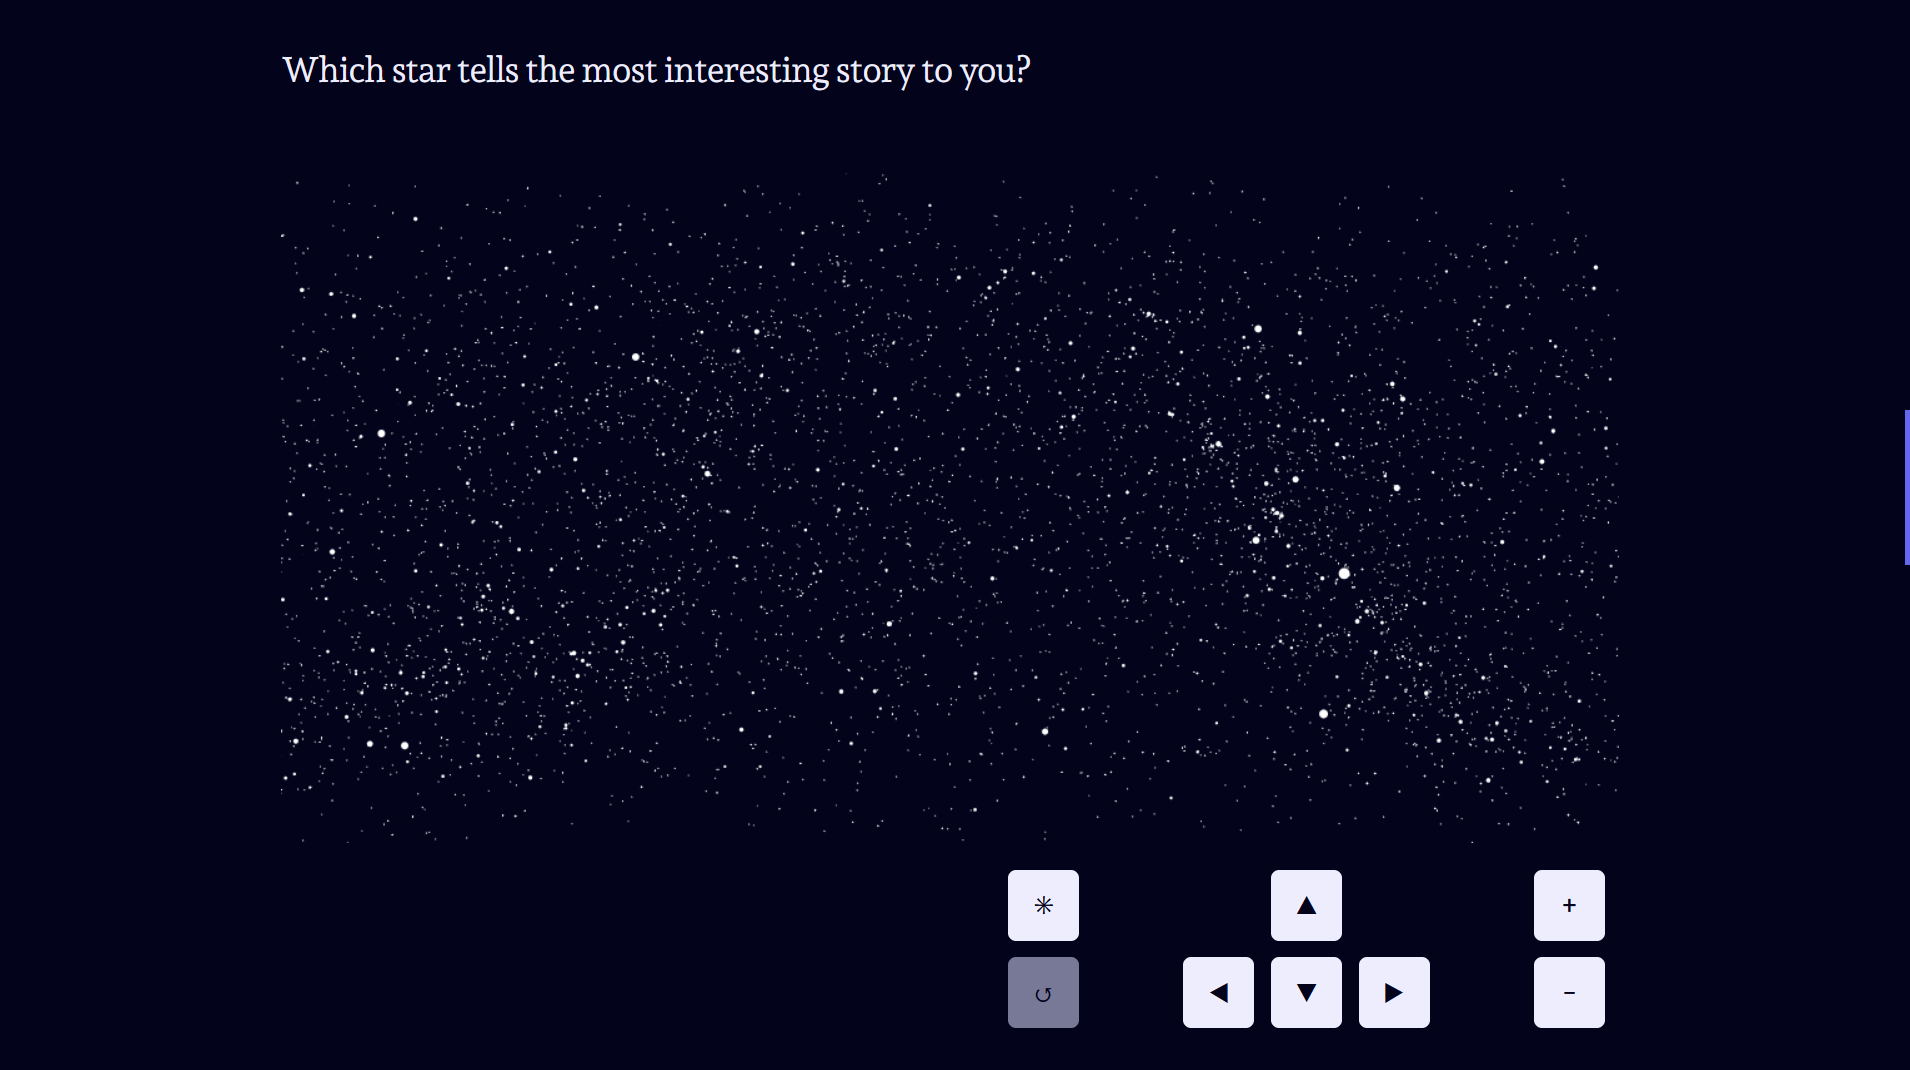 Screenshot of a map of the night sky. On top there is text that reads 'Which star tells the most interesting story to you?'. The map shows around 5,000 stars, depicted as white circles on a dark blue background. Below the map there is a group of buttons that include arrow buttons for all directions, zoom-buttons, a reset button and a button with a star-symbol.